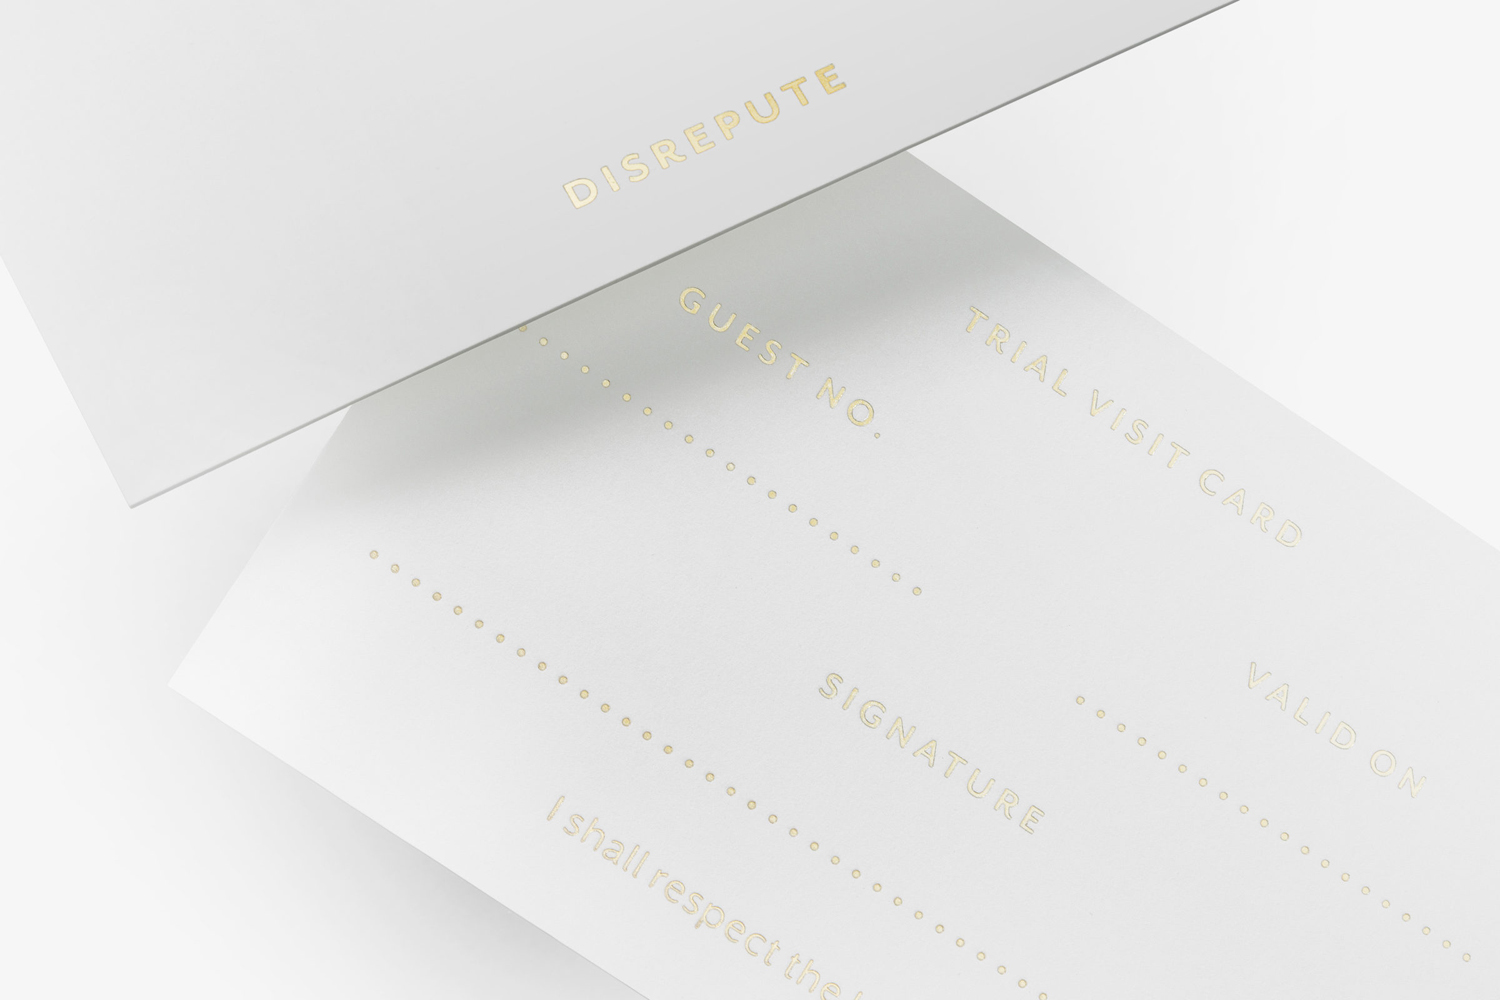 Brand identity and visitor's card with gold foil detail designed by London-based studio Two Times Elliott for Soho members bar Disrepute